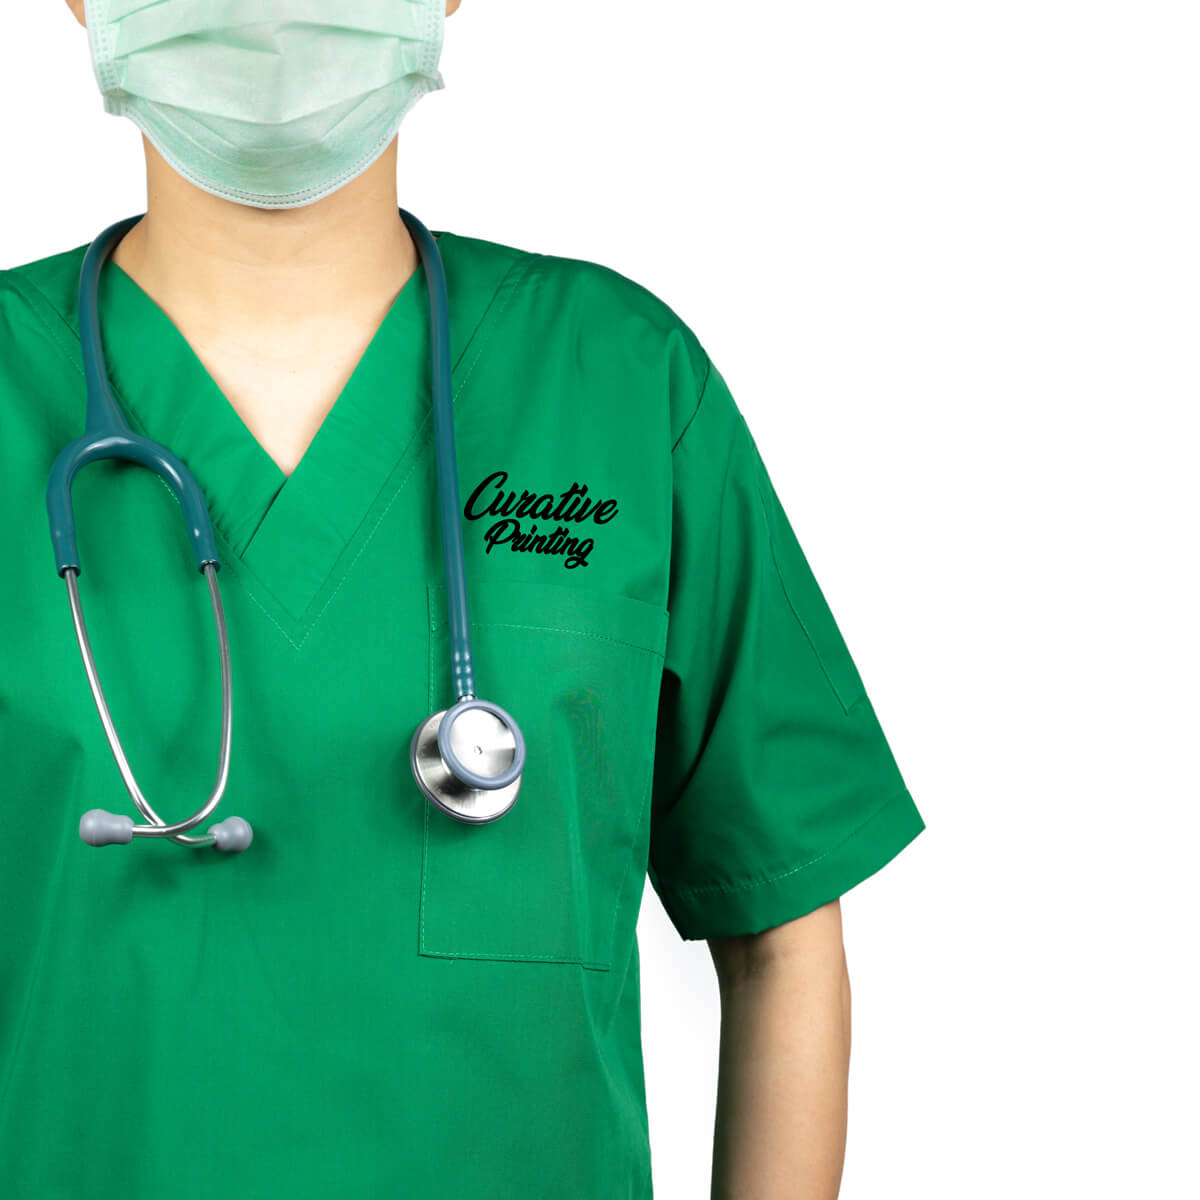 Doctor in green custom branded scrub apparel promotional wellness & safety by curative printing